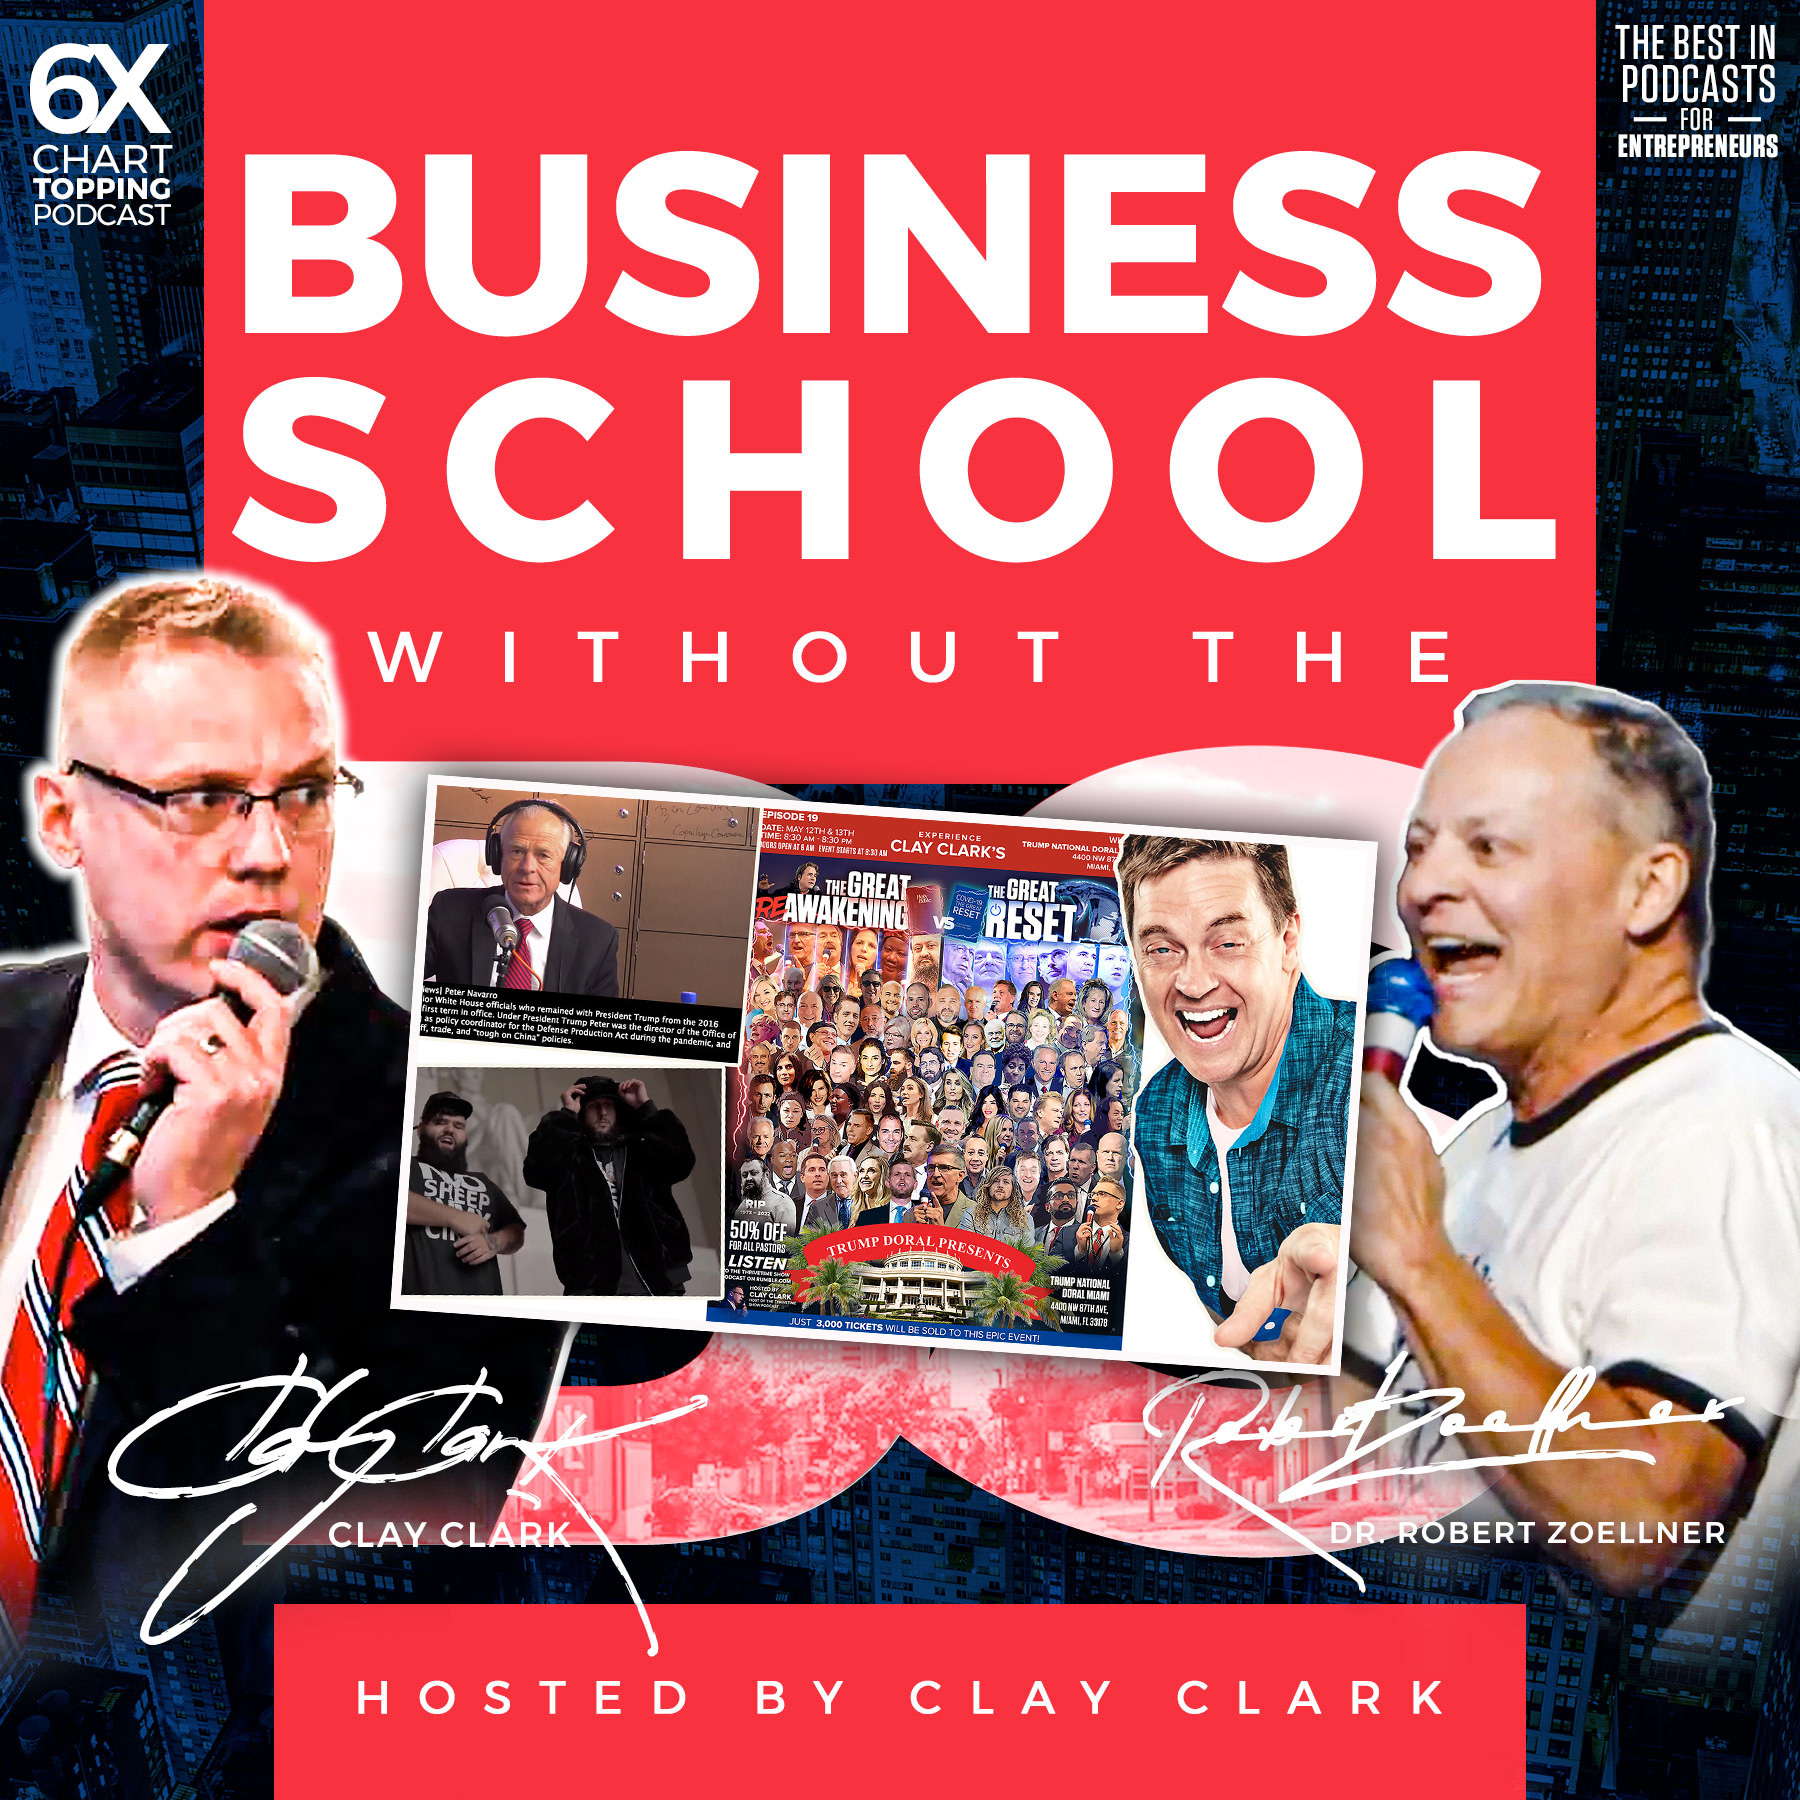 Business | The Art of Getting Things Done “What Gets Schedule Gets Done.” | Clay Clark Teaches the Specific Systems And Processes He Uses On a Daily Basis to Get Things Done